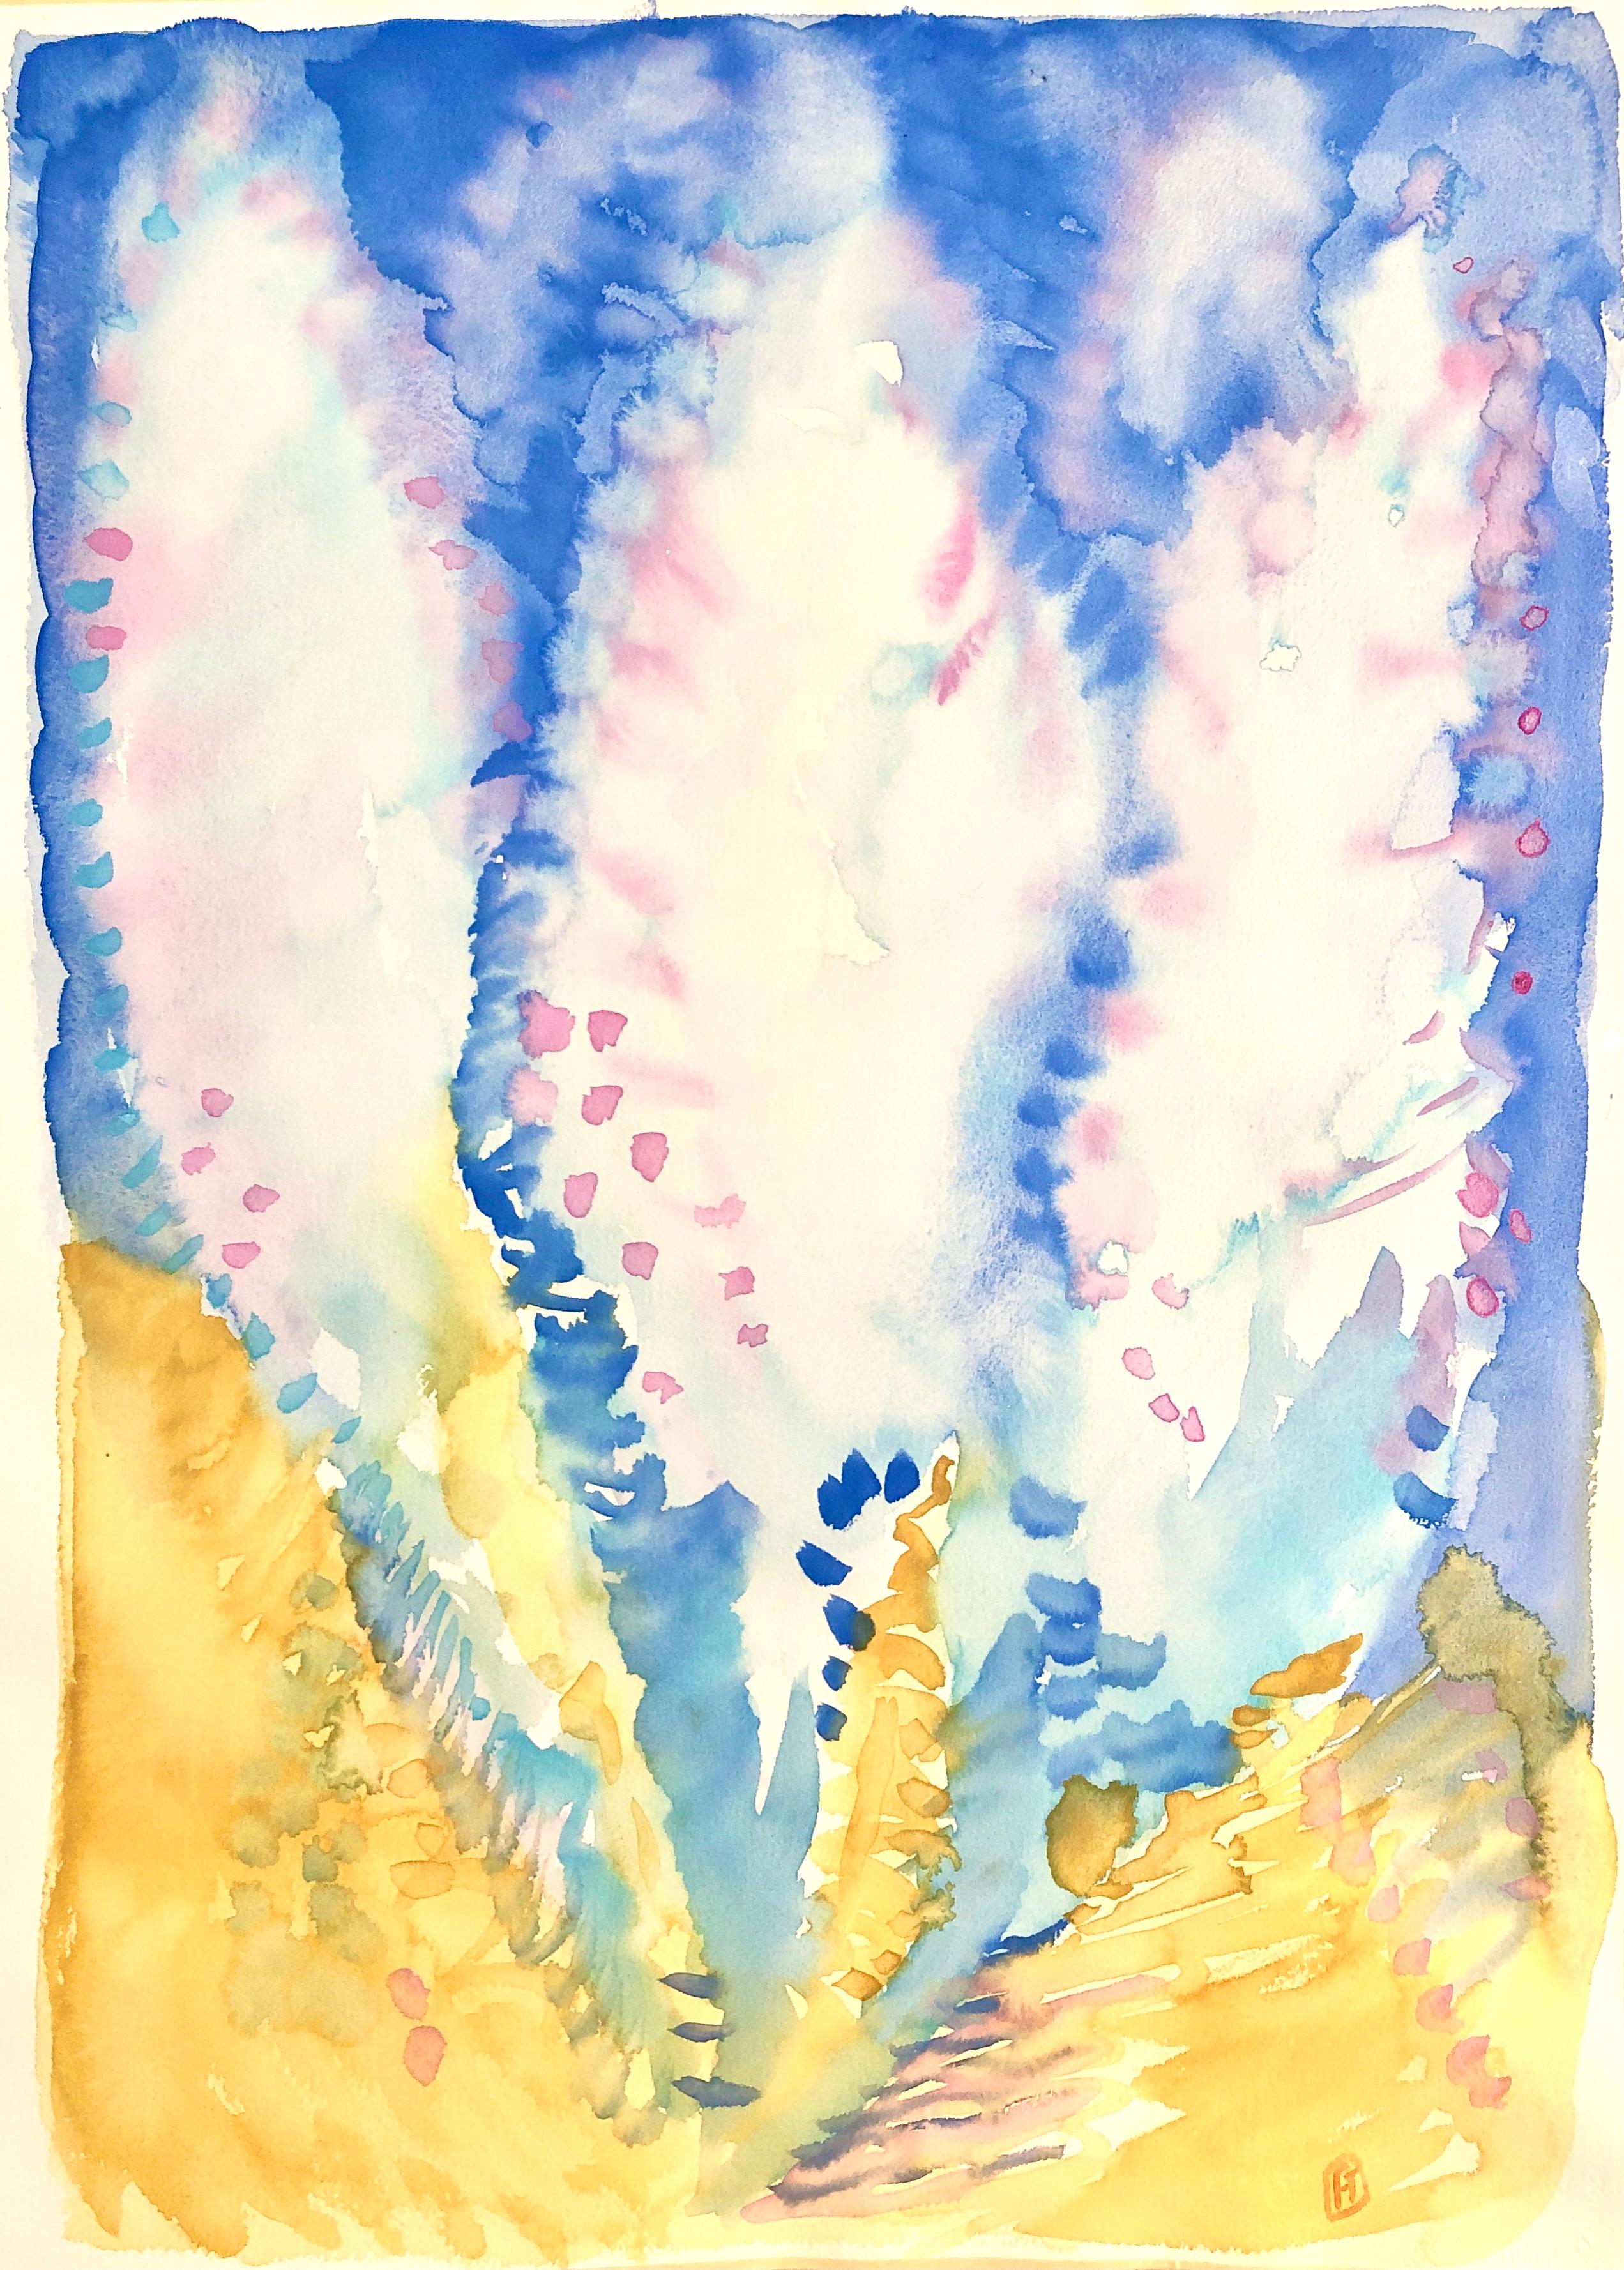 Fleur Thesmar Abstract Drawing - "DREAM 1", watercolor, abstract flowers, cypresses, feathers, lilac, gold, blue